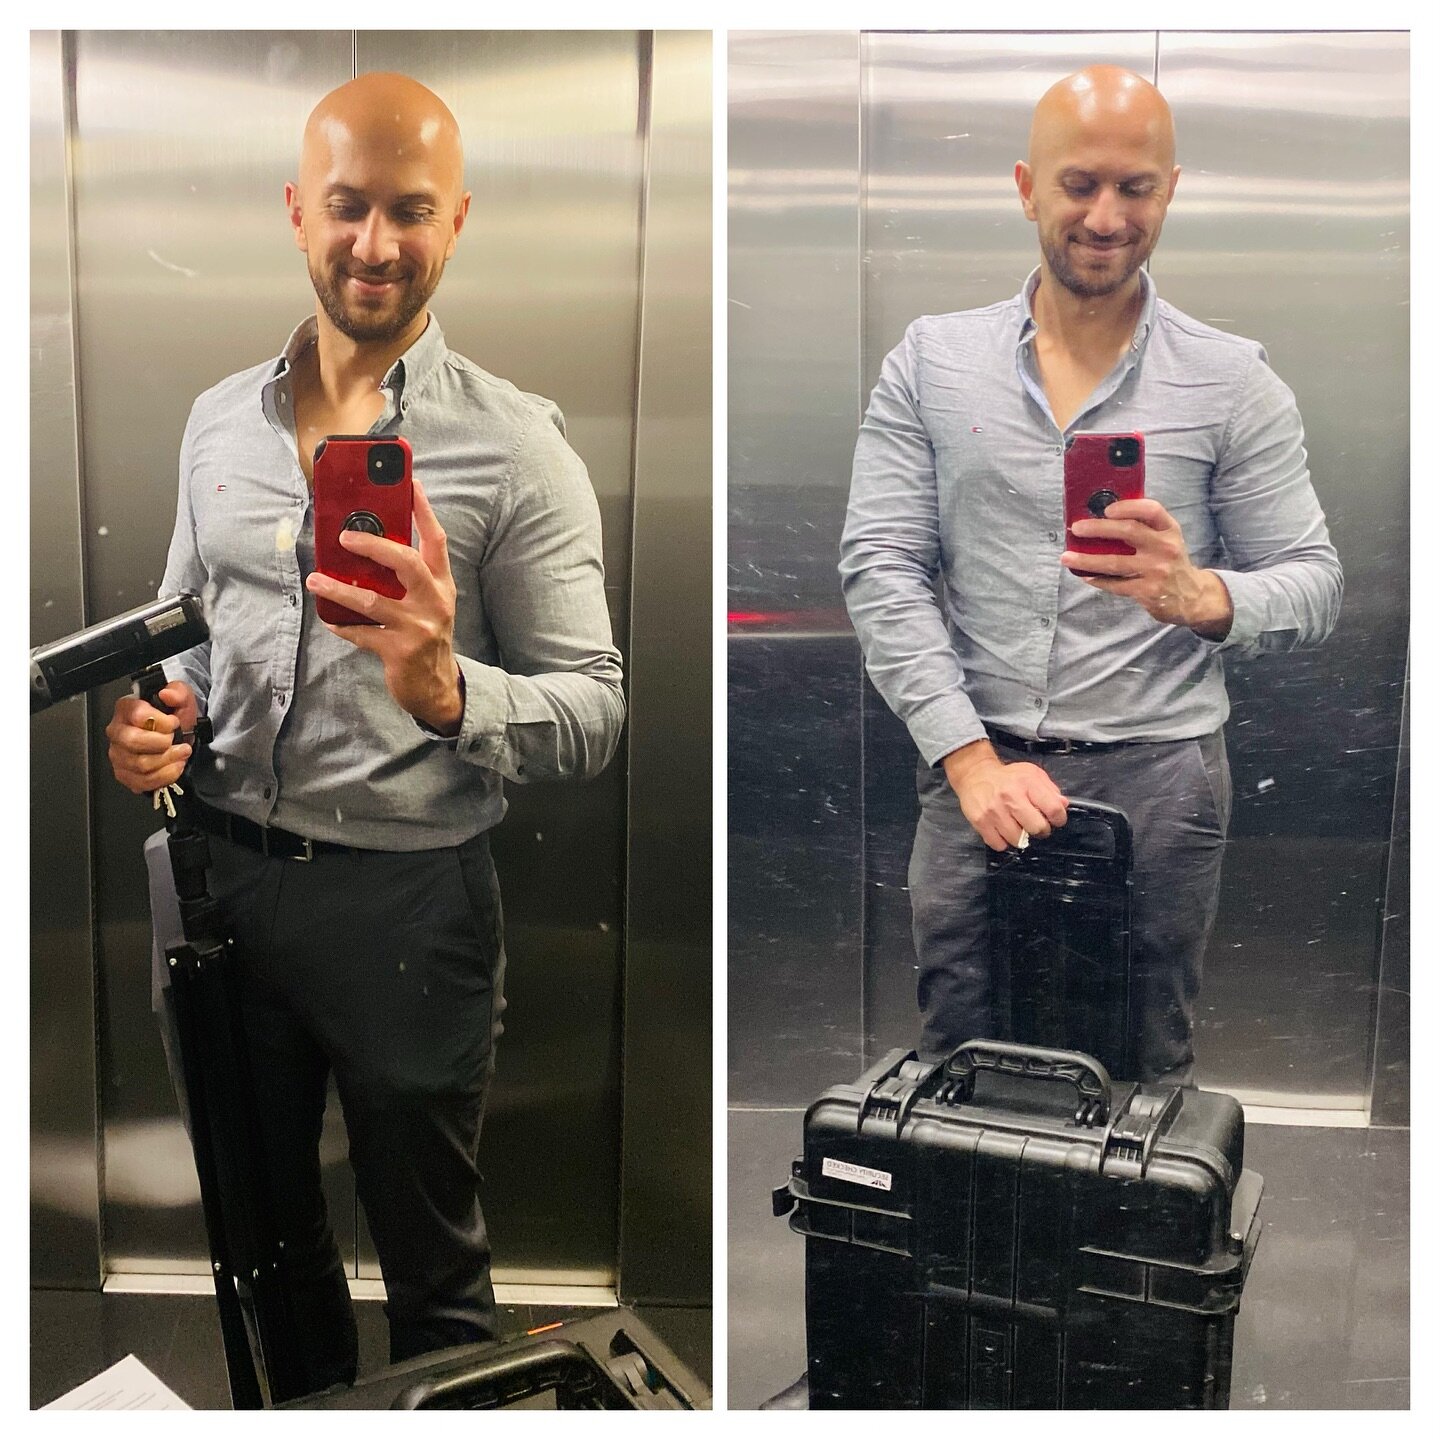 Me at the start of a 16 hour wedding shoot VS me at the end of a 16 hour wedding shoot. #stillsmiling #lovemyjob 

Thank you everyone for an amazing 2023. Looking forward to some epic wedding shoots in 2024! 

HAPPY NEW YEAR, everyone! 

🏷️ wedding 